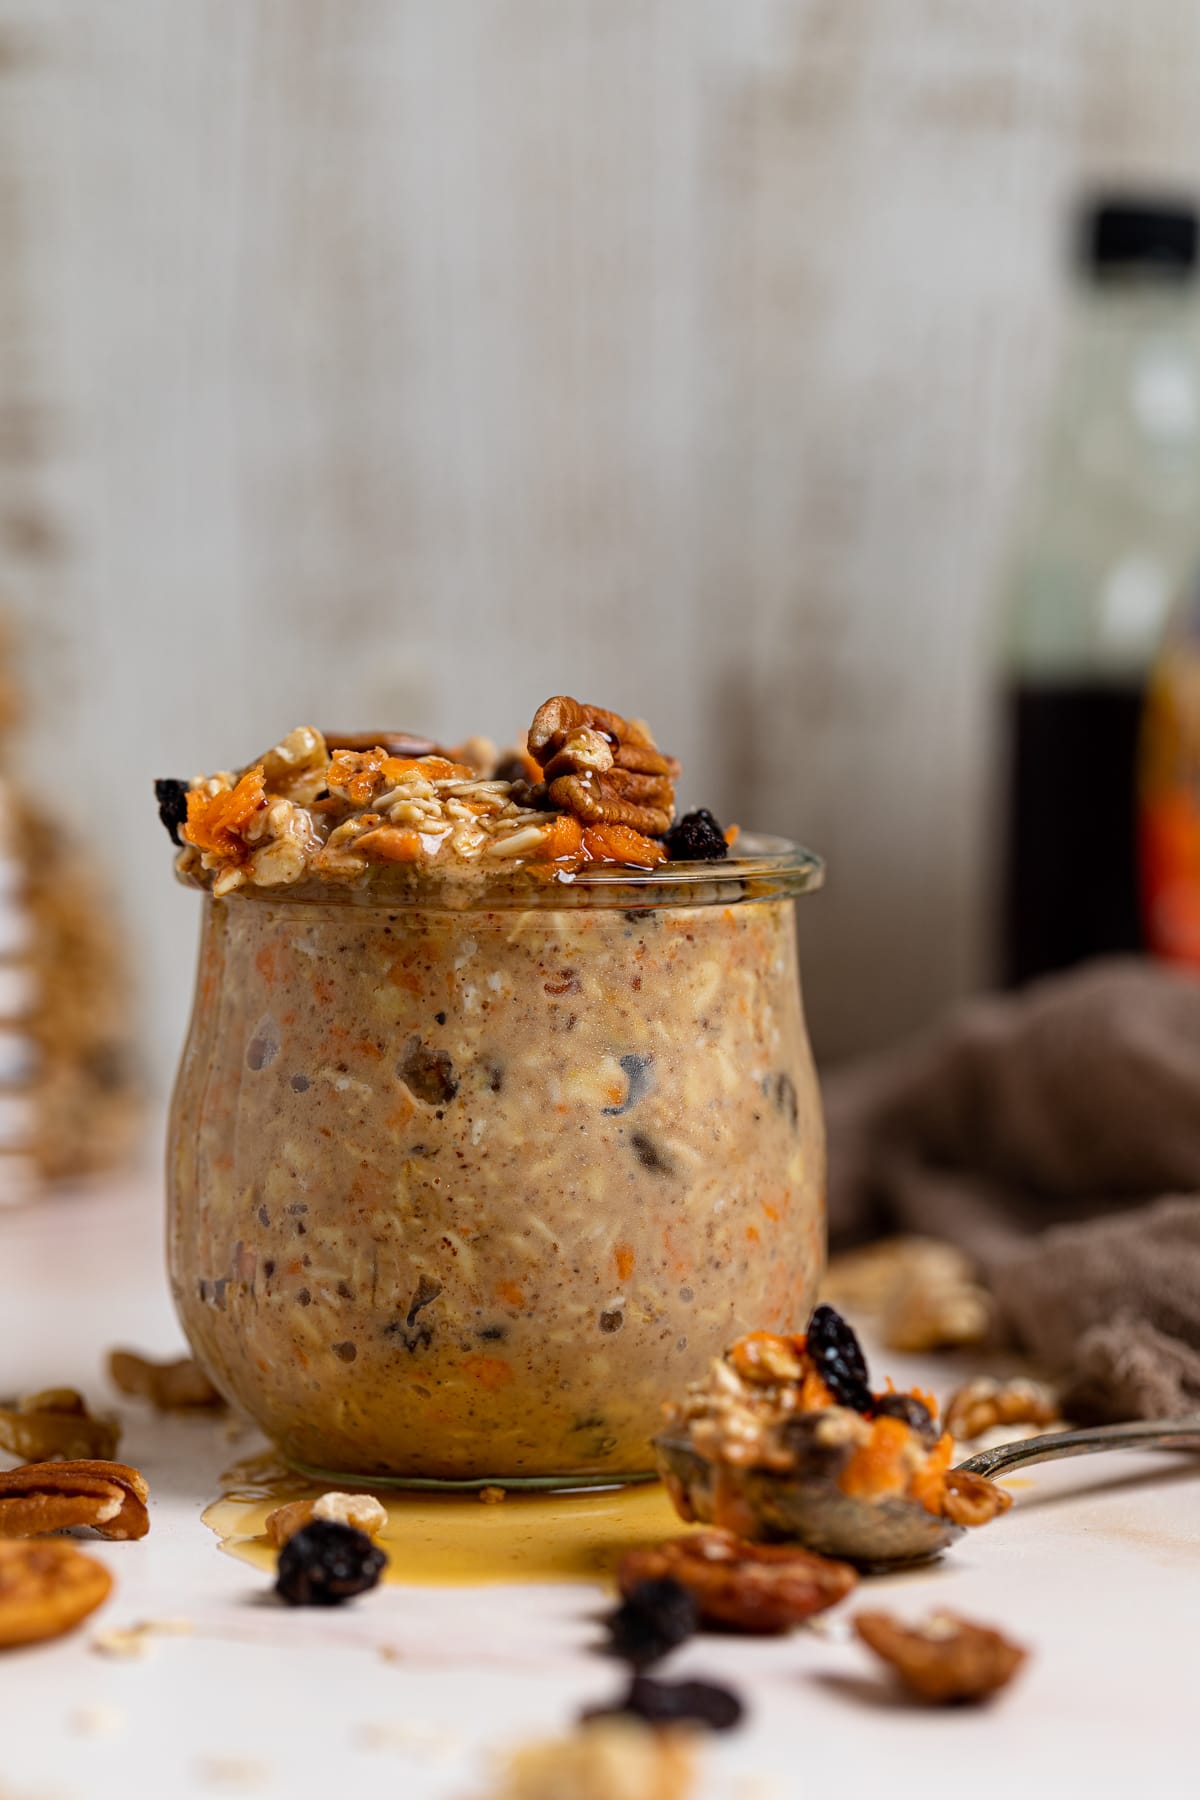 Spoon of Spiced Carrot Cake Overnight Oats next to the glass full of the oats